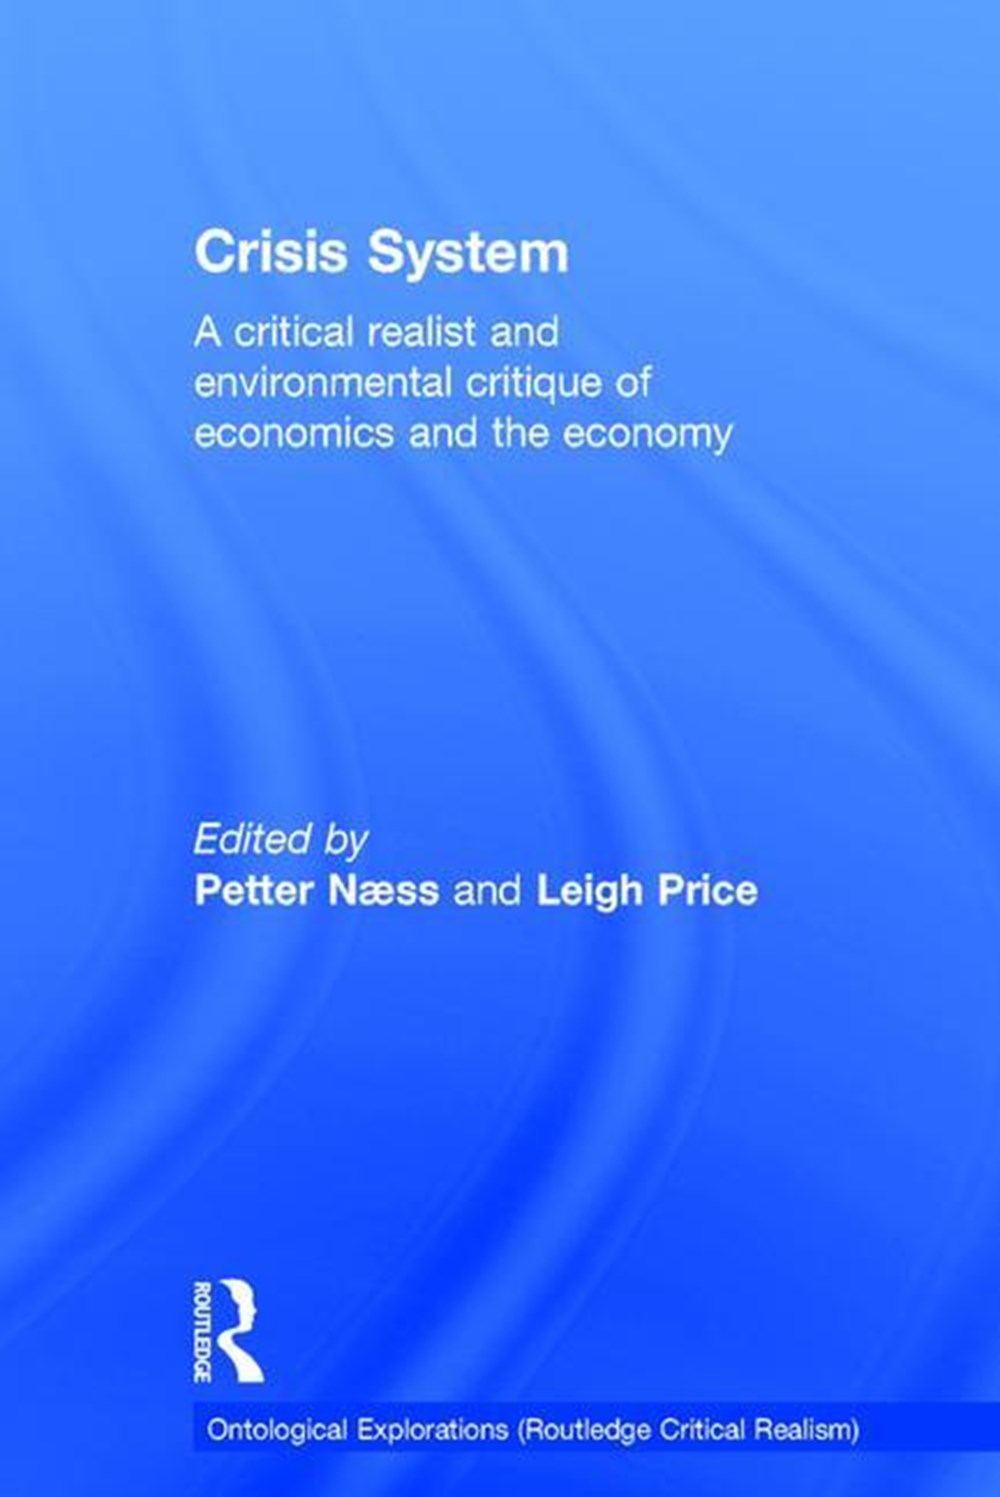 Crisis System: A Critical Realist and Environmental Critique of Economics and the Economy